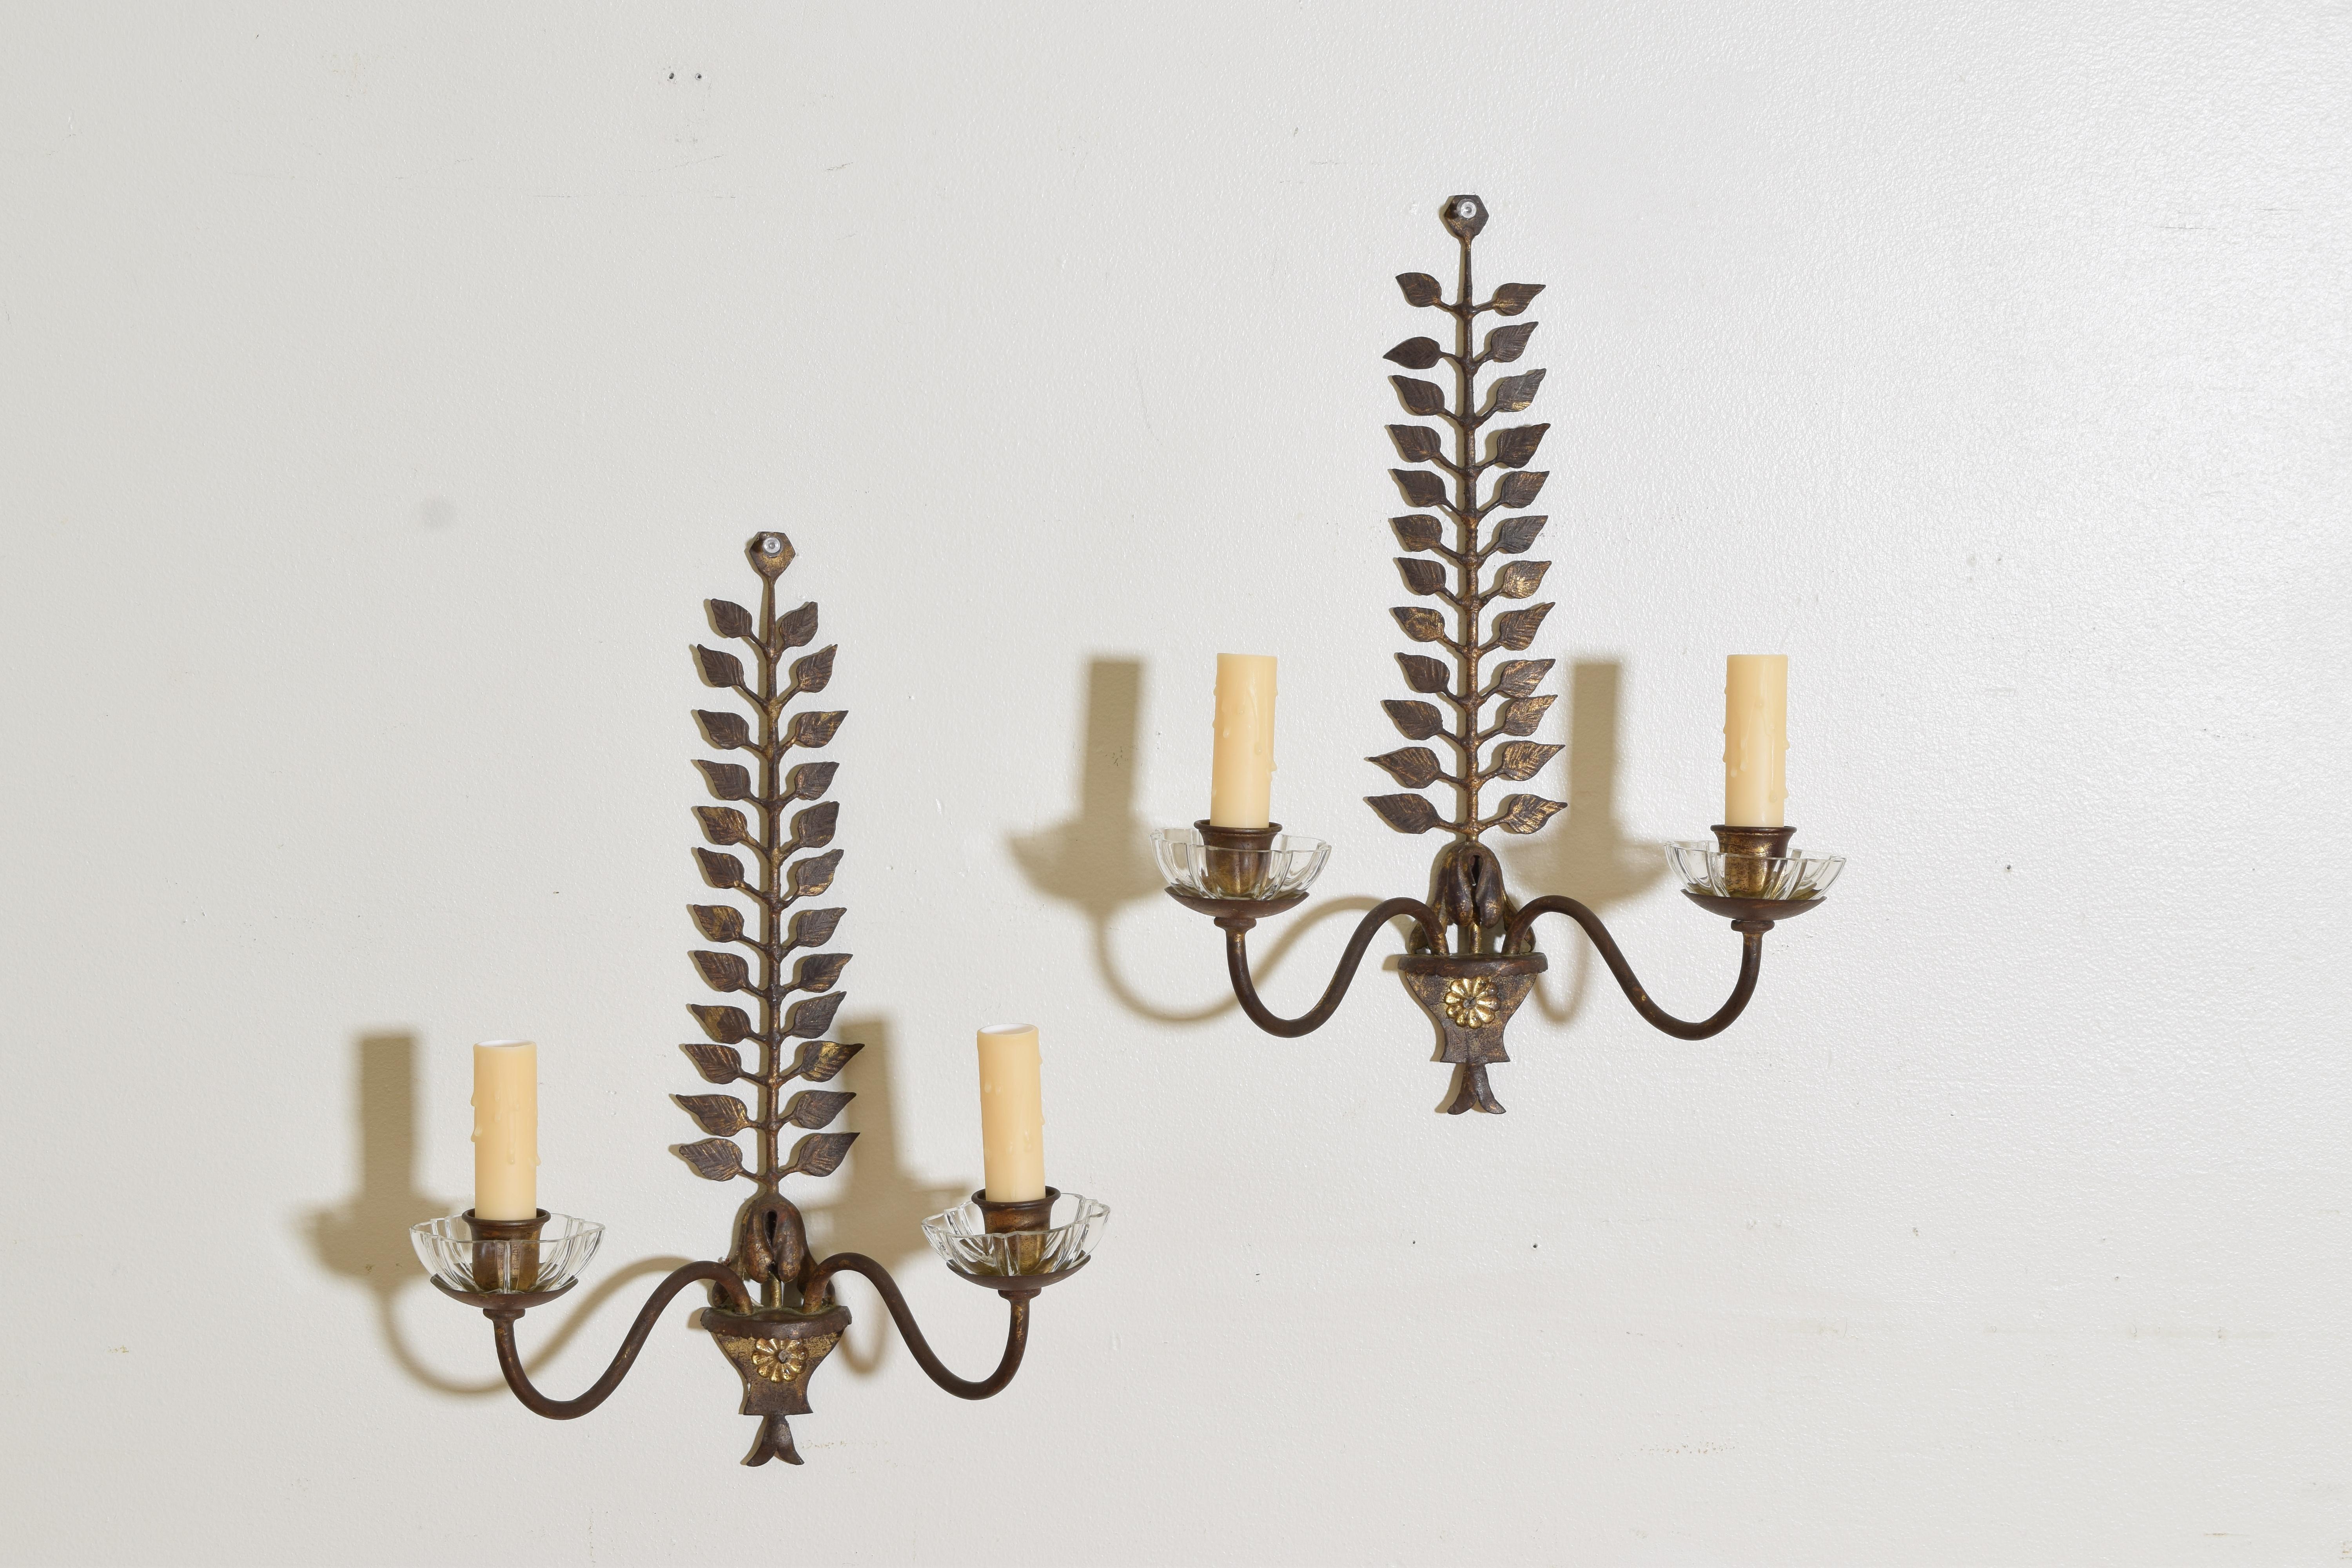 A pair of previously gilded 2-light wall sconces with leaves of cut metal in tapering columns with glass bobeches and glass rosettes at the bases